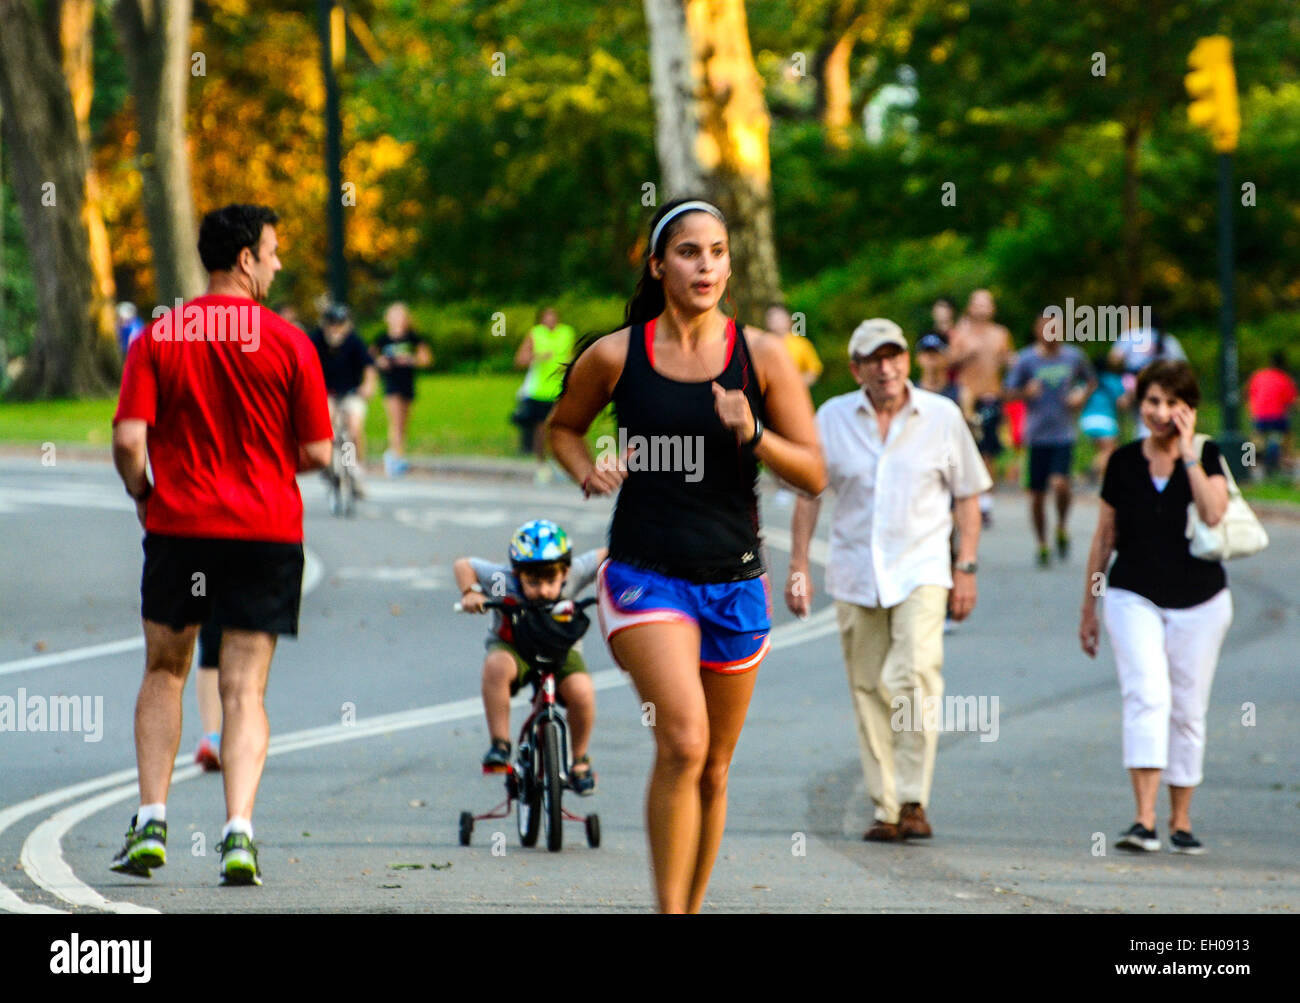 Runners in Central Park, Manhattan, New York City, USA. Practice run during afternoon summer. Stock Photo